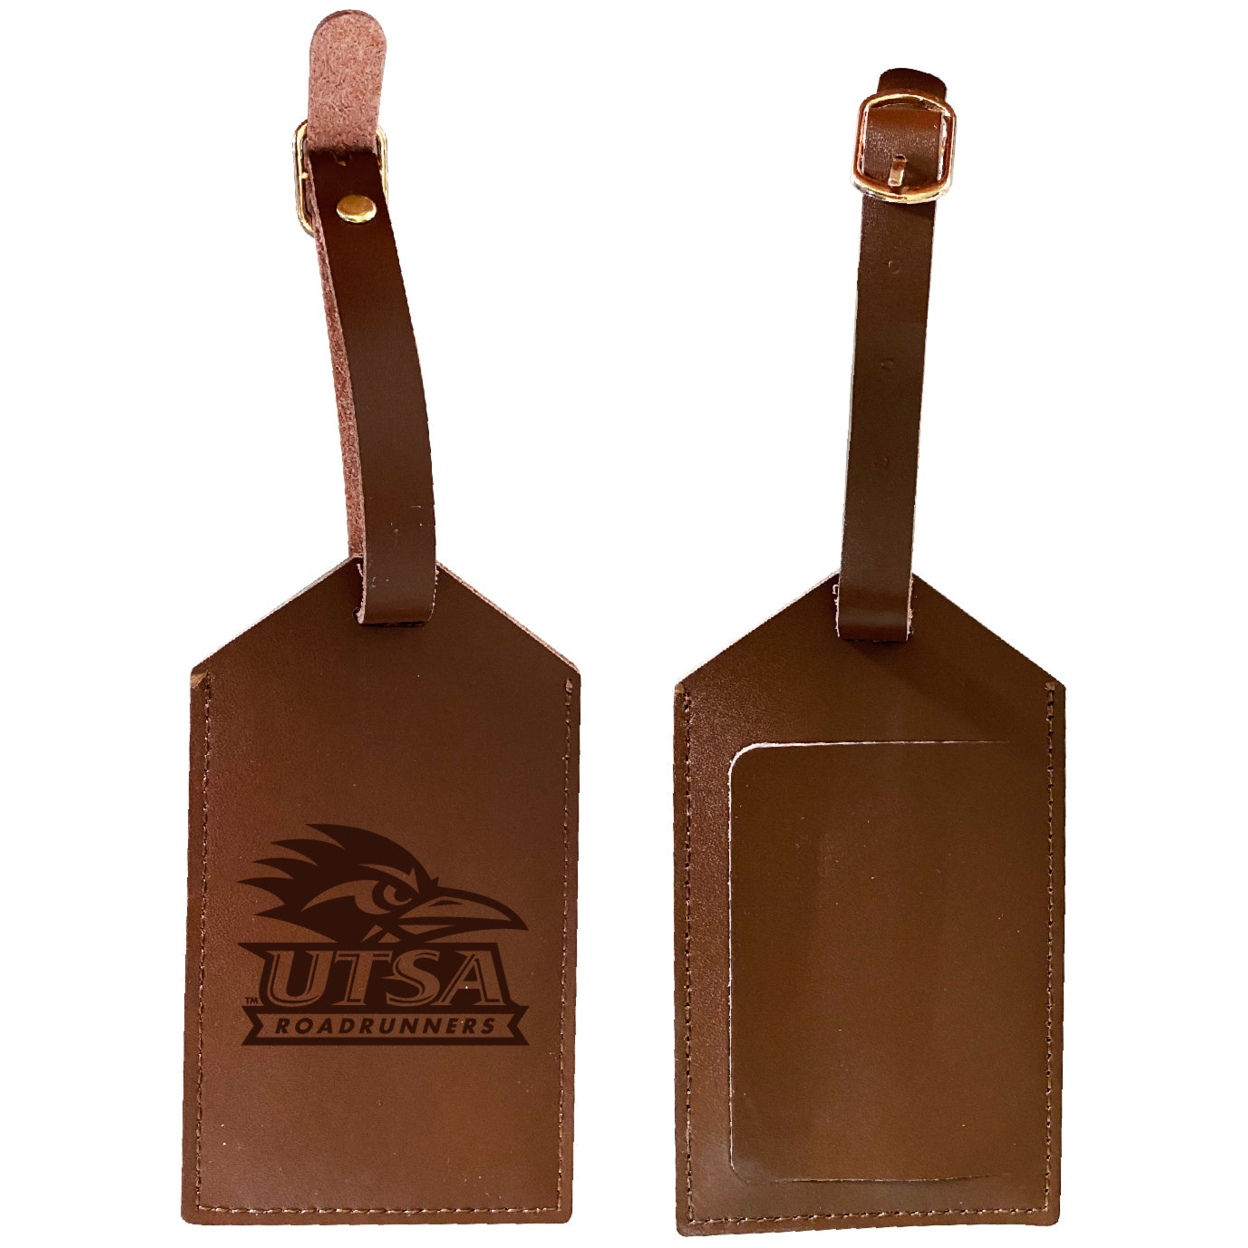 UTSA Road Runners Leather Luggage Tag Engraved